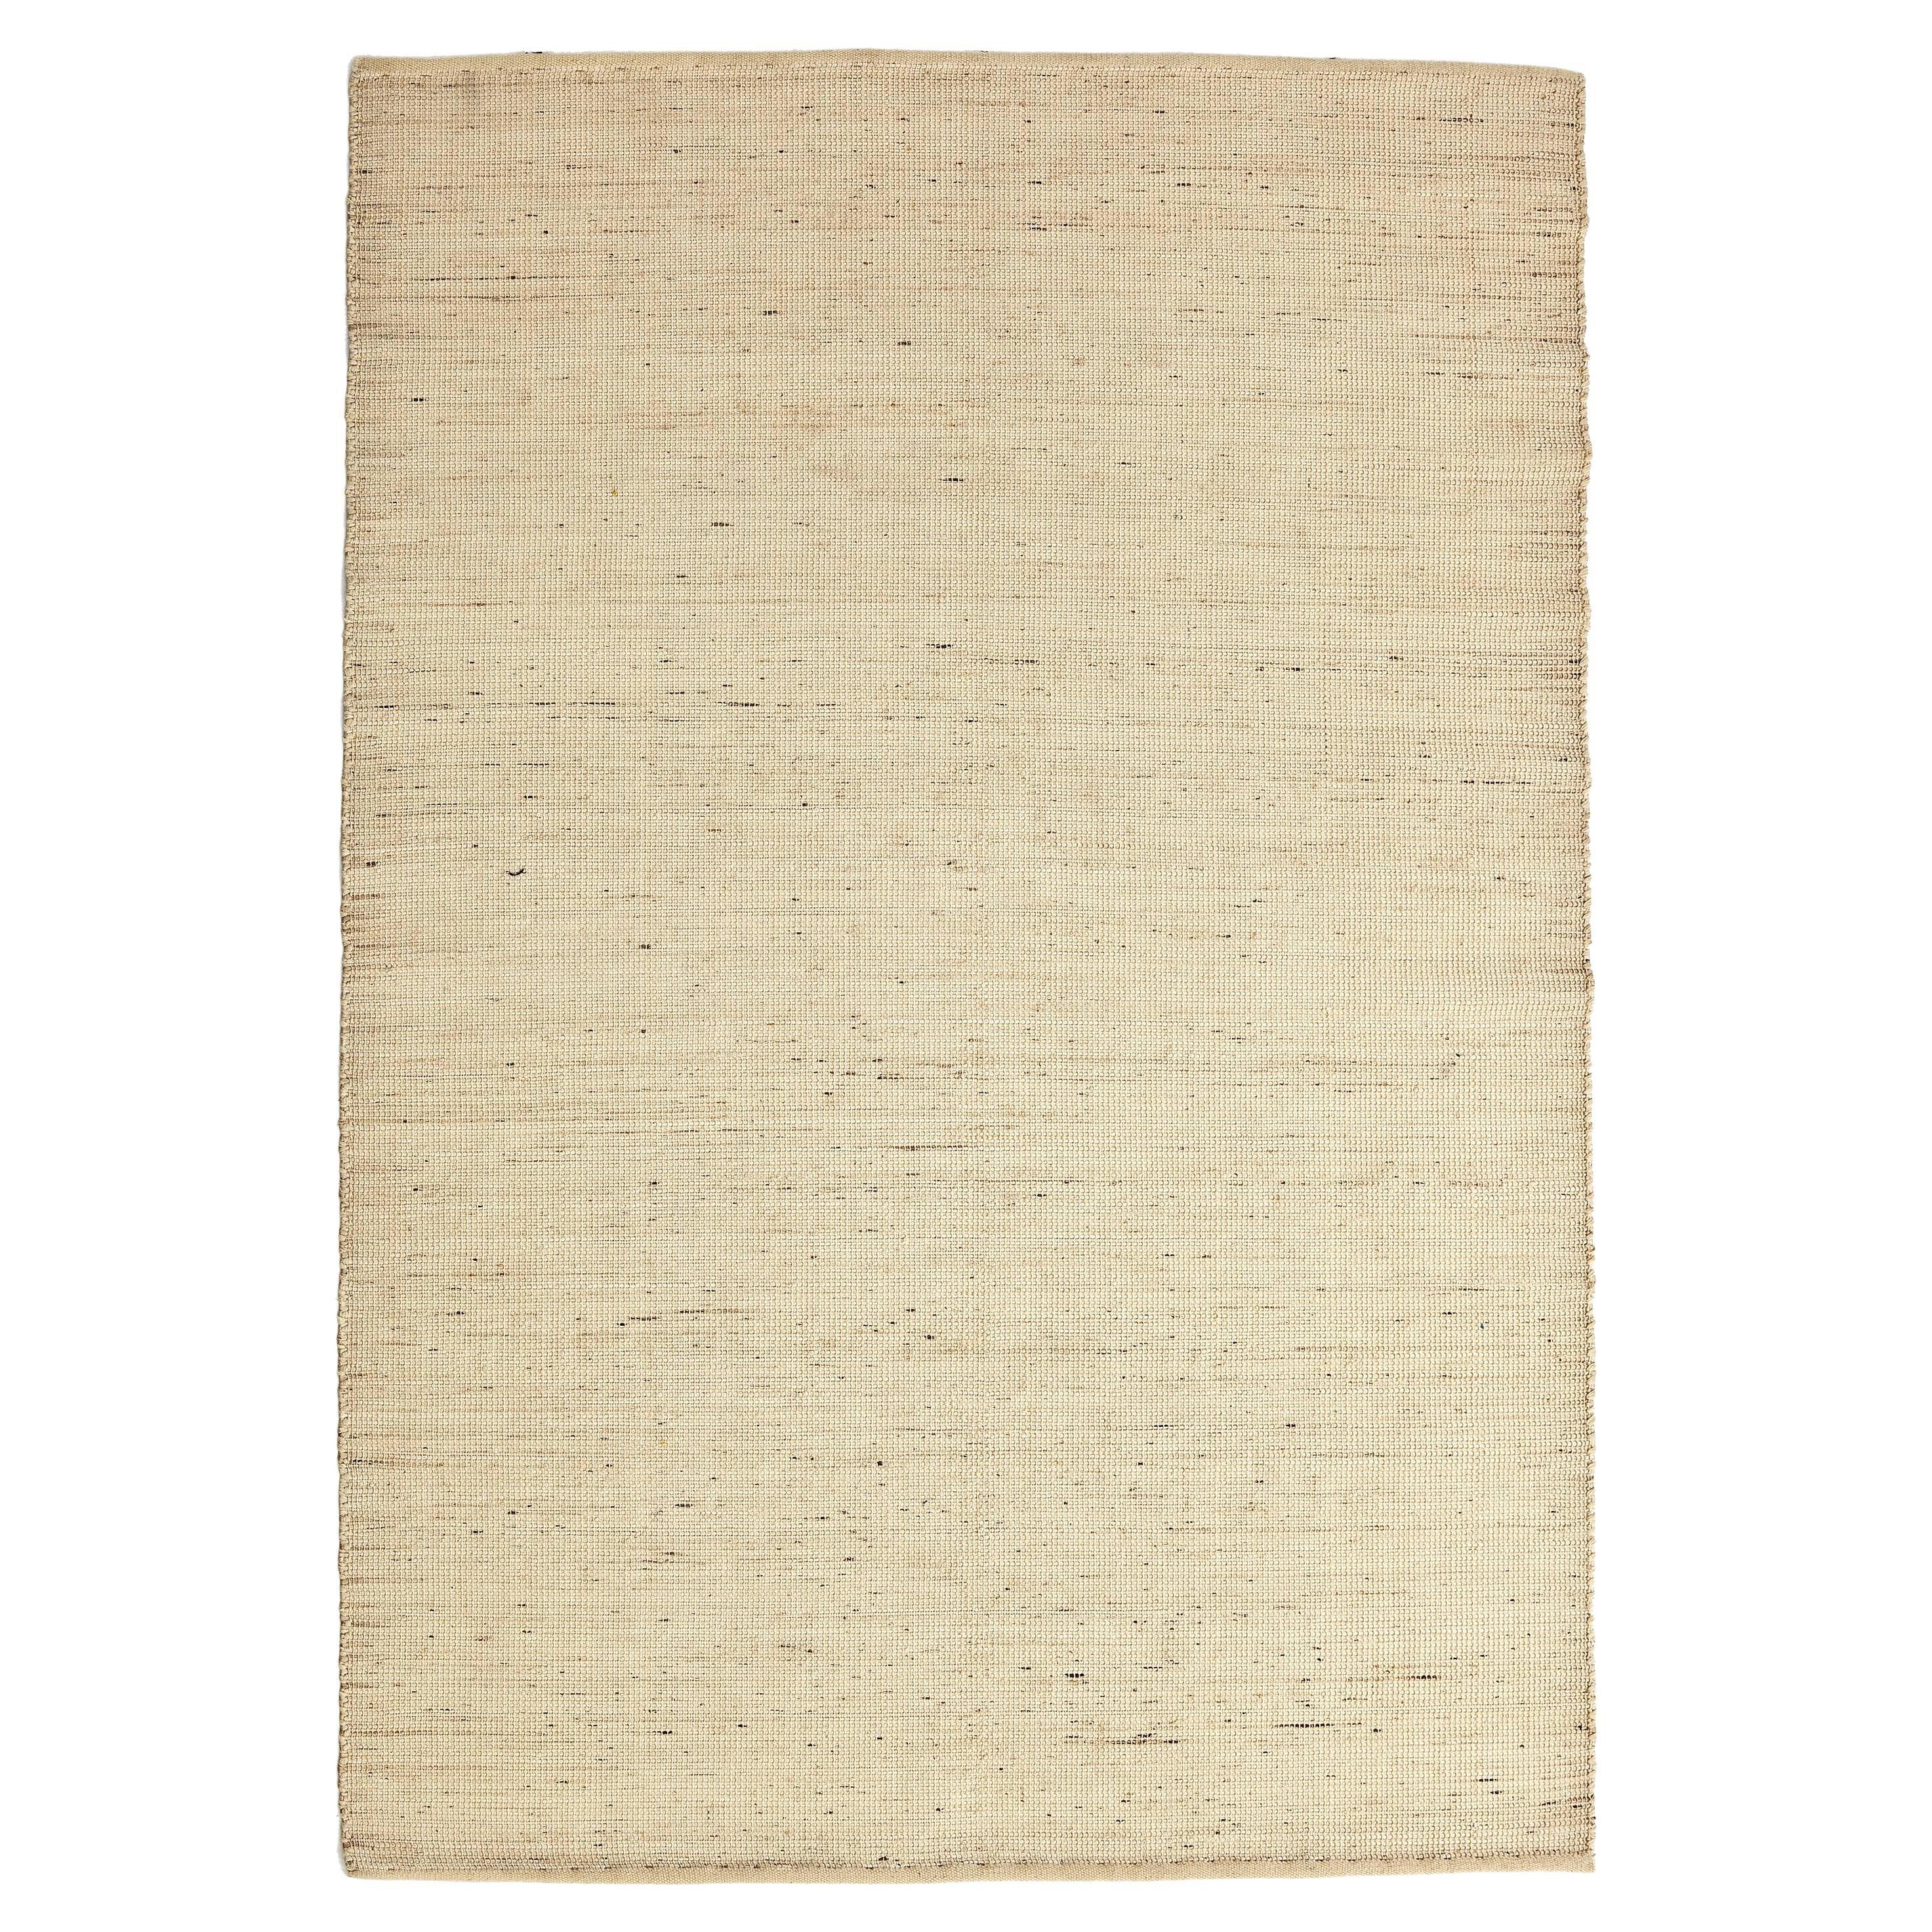 Large 'Tatami' Rug by Ariadna Miquel and Nani Marquina for Nanimarquina